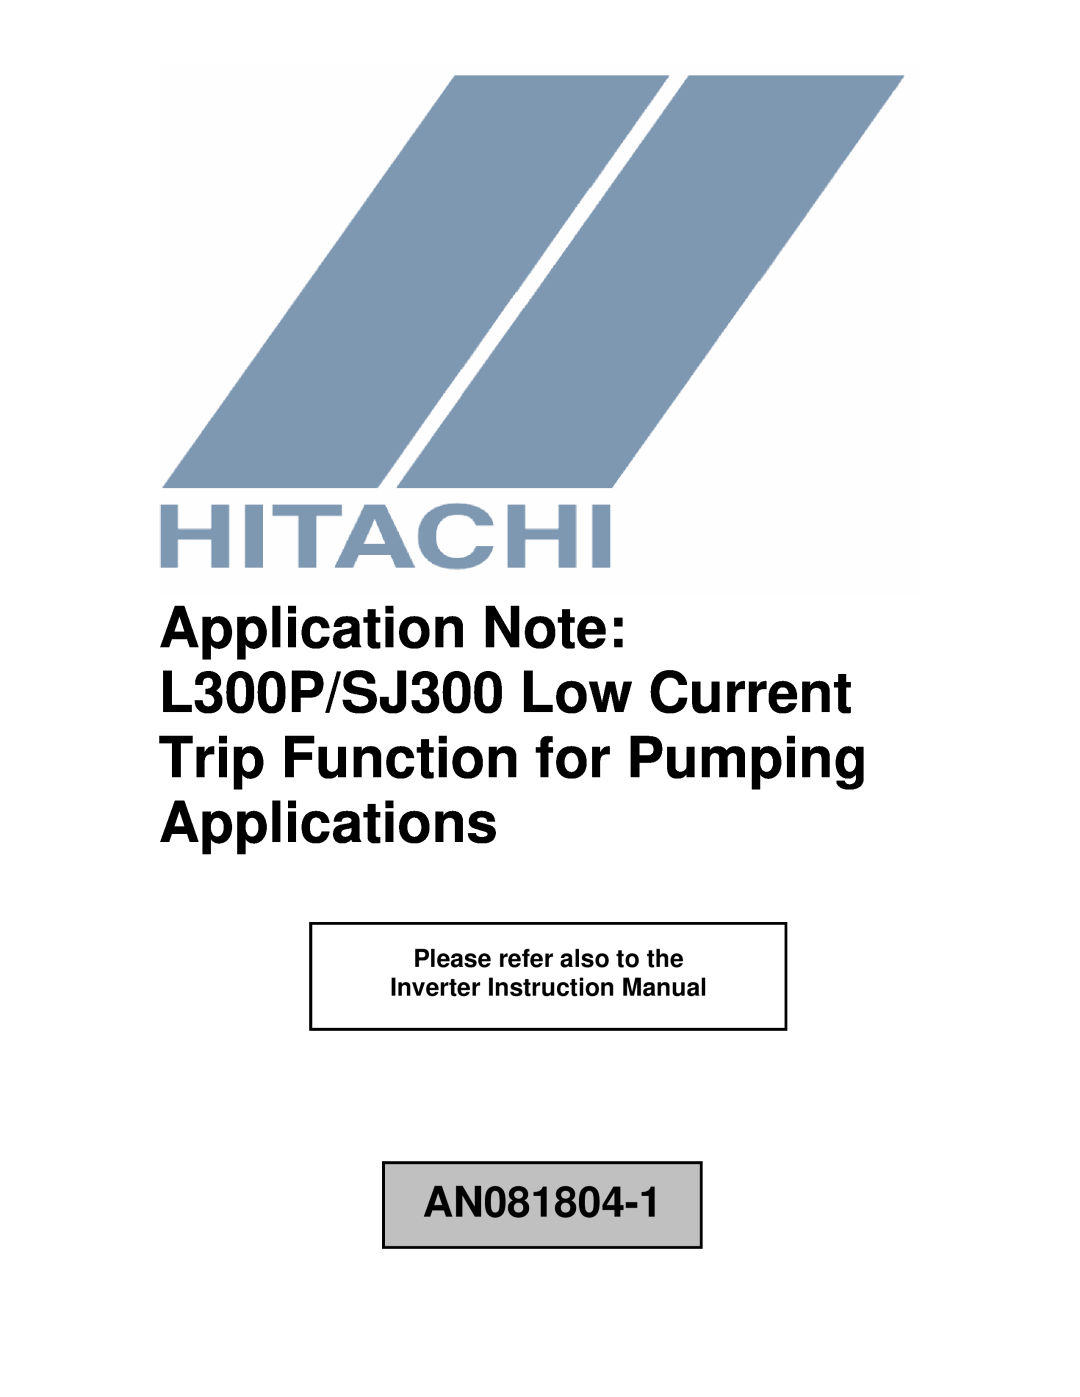 Hitachi hitachi low current trip function for pumping applications instruction manual AN081804-1, Please refer also to the 